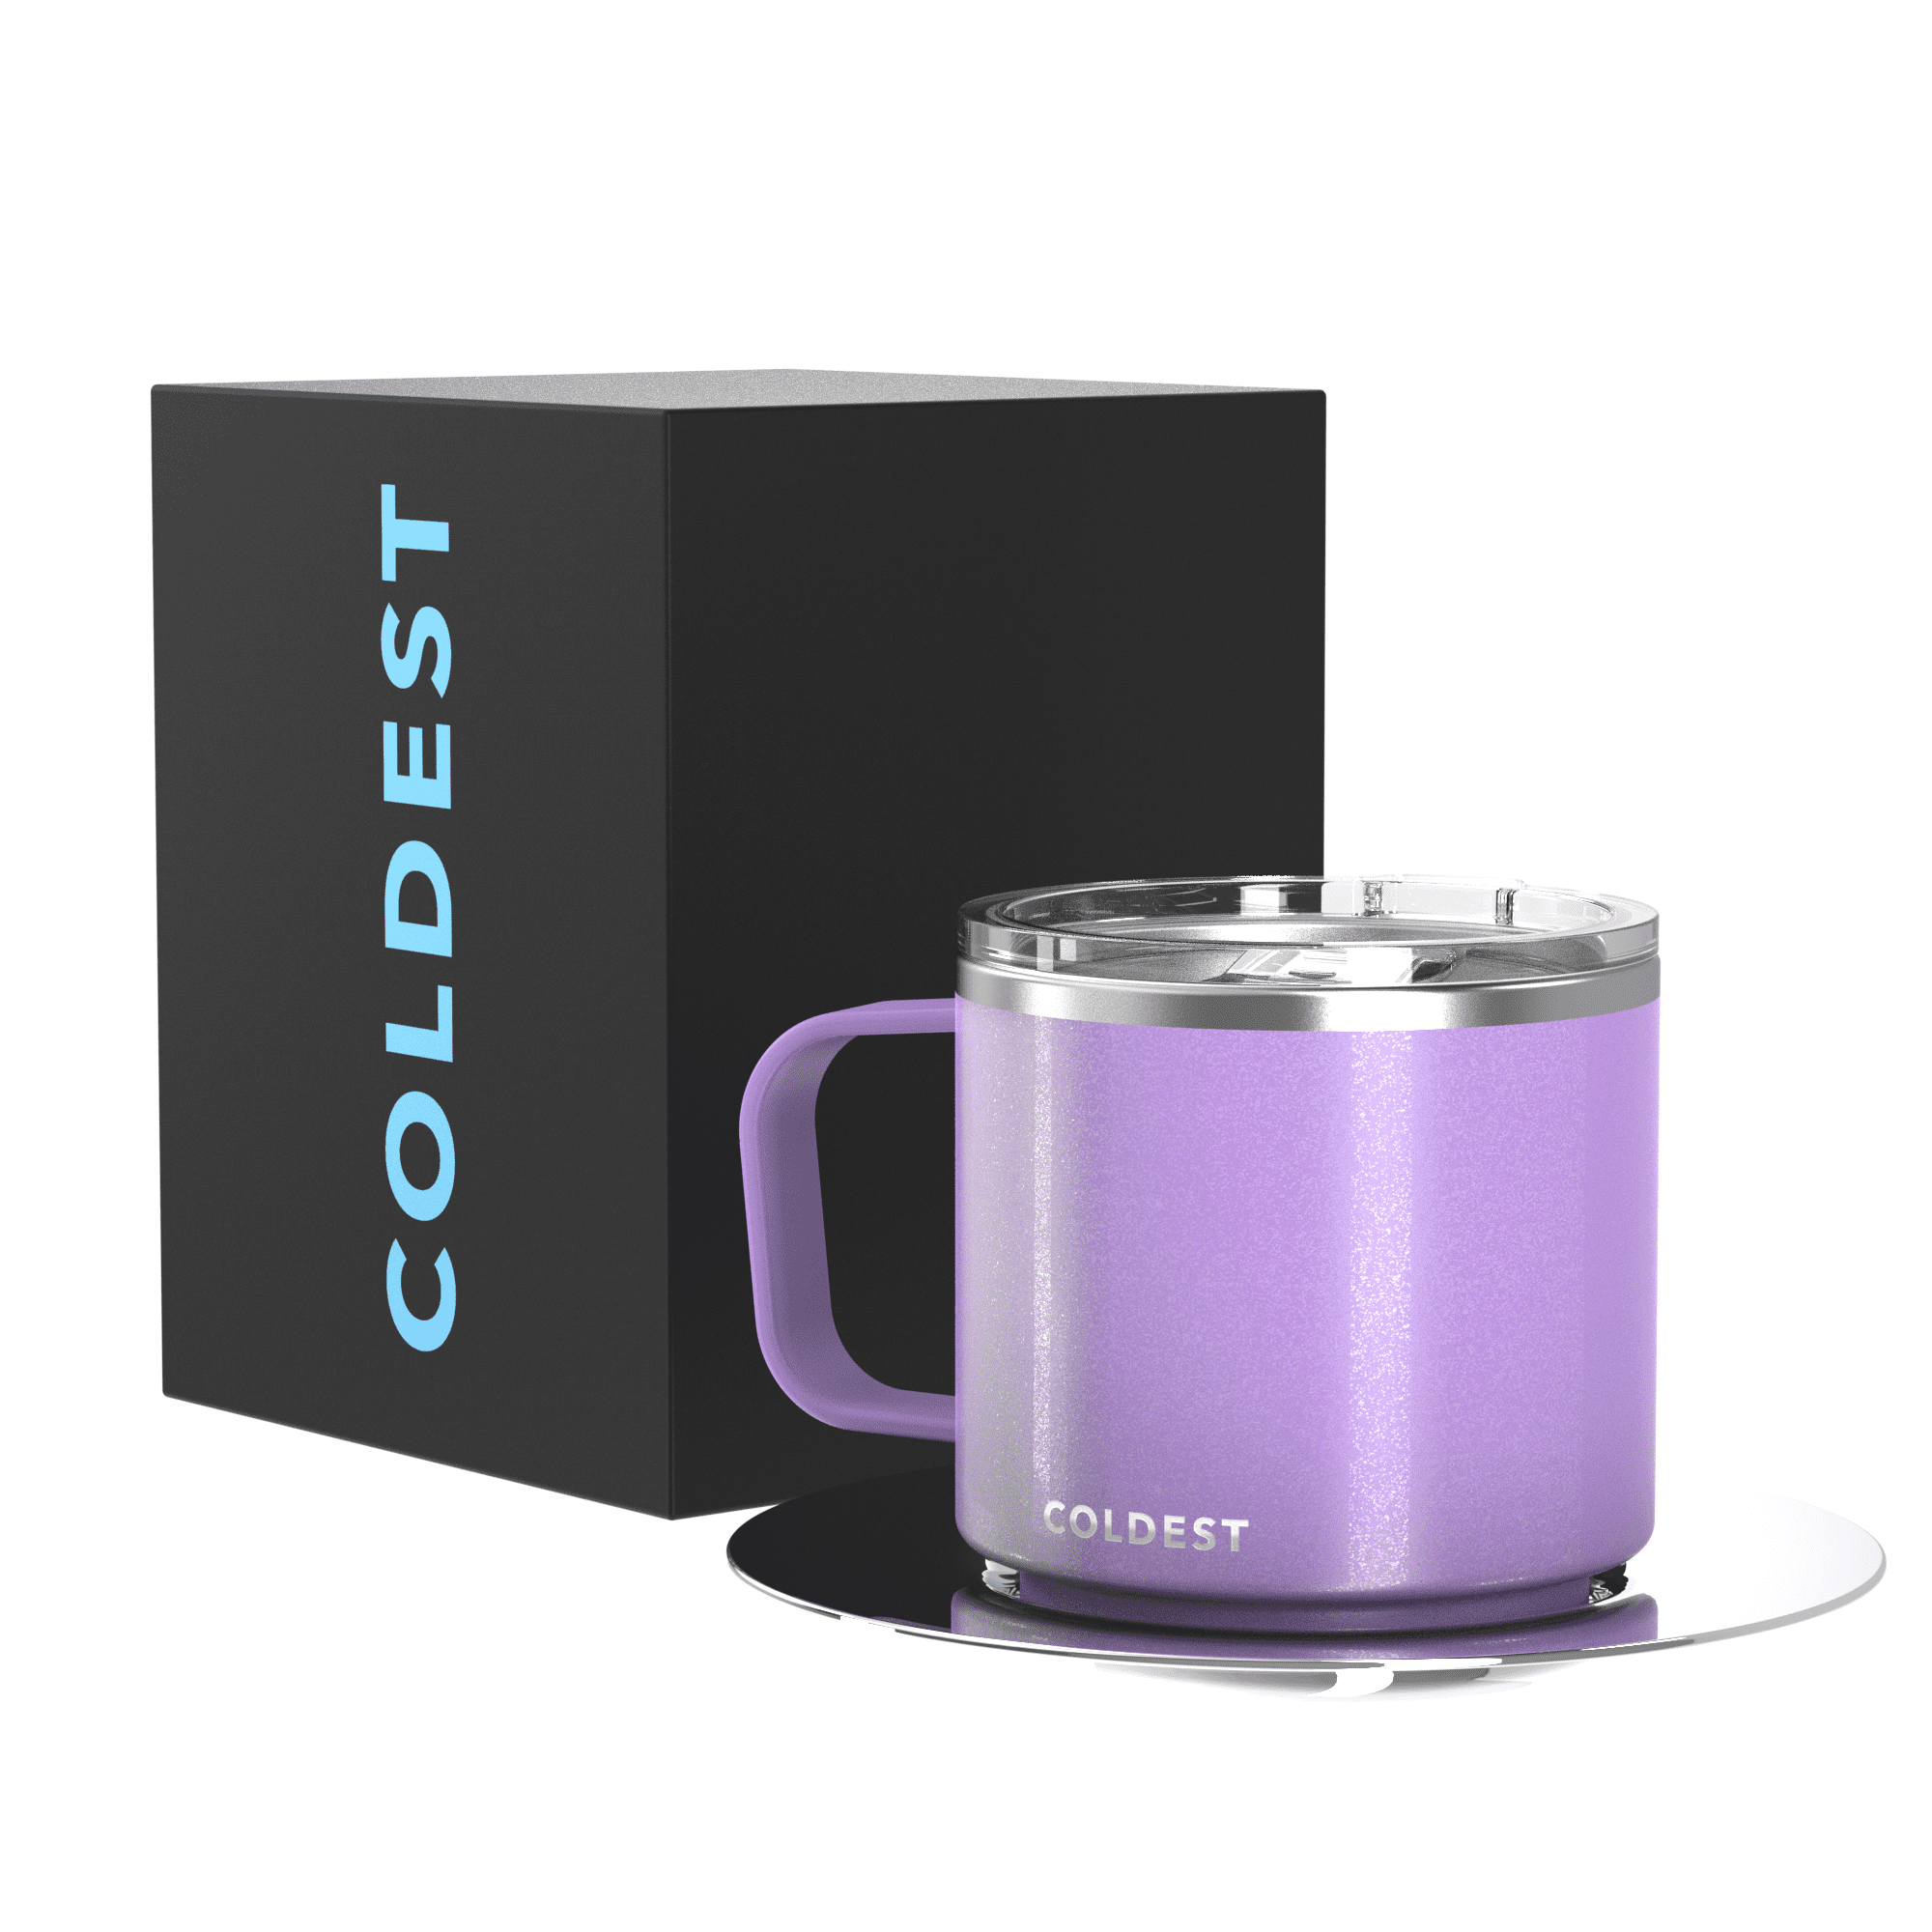 CHTENZY Insulated Travel Coffee Mug With Lid, Hot and Cold, Stainless Steel  Cups, Transparent Lid, P…See more CHTENZY Insulated Travel Coffee Mug With